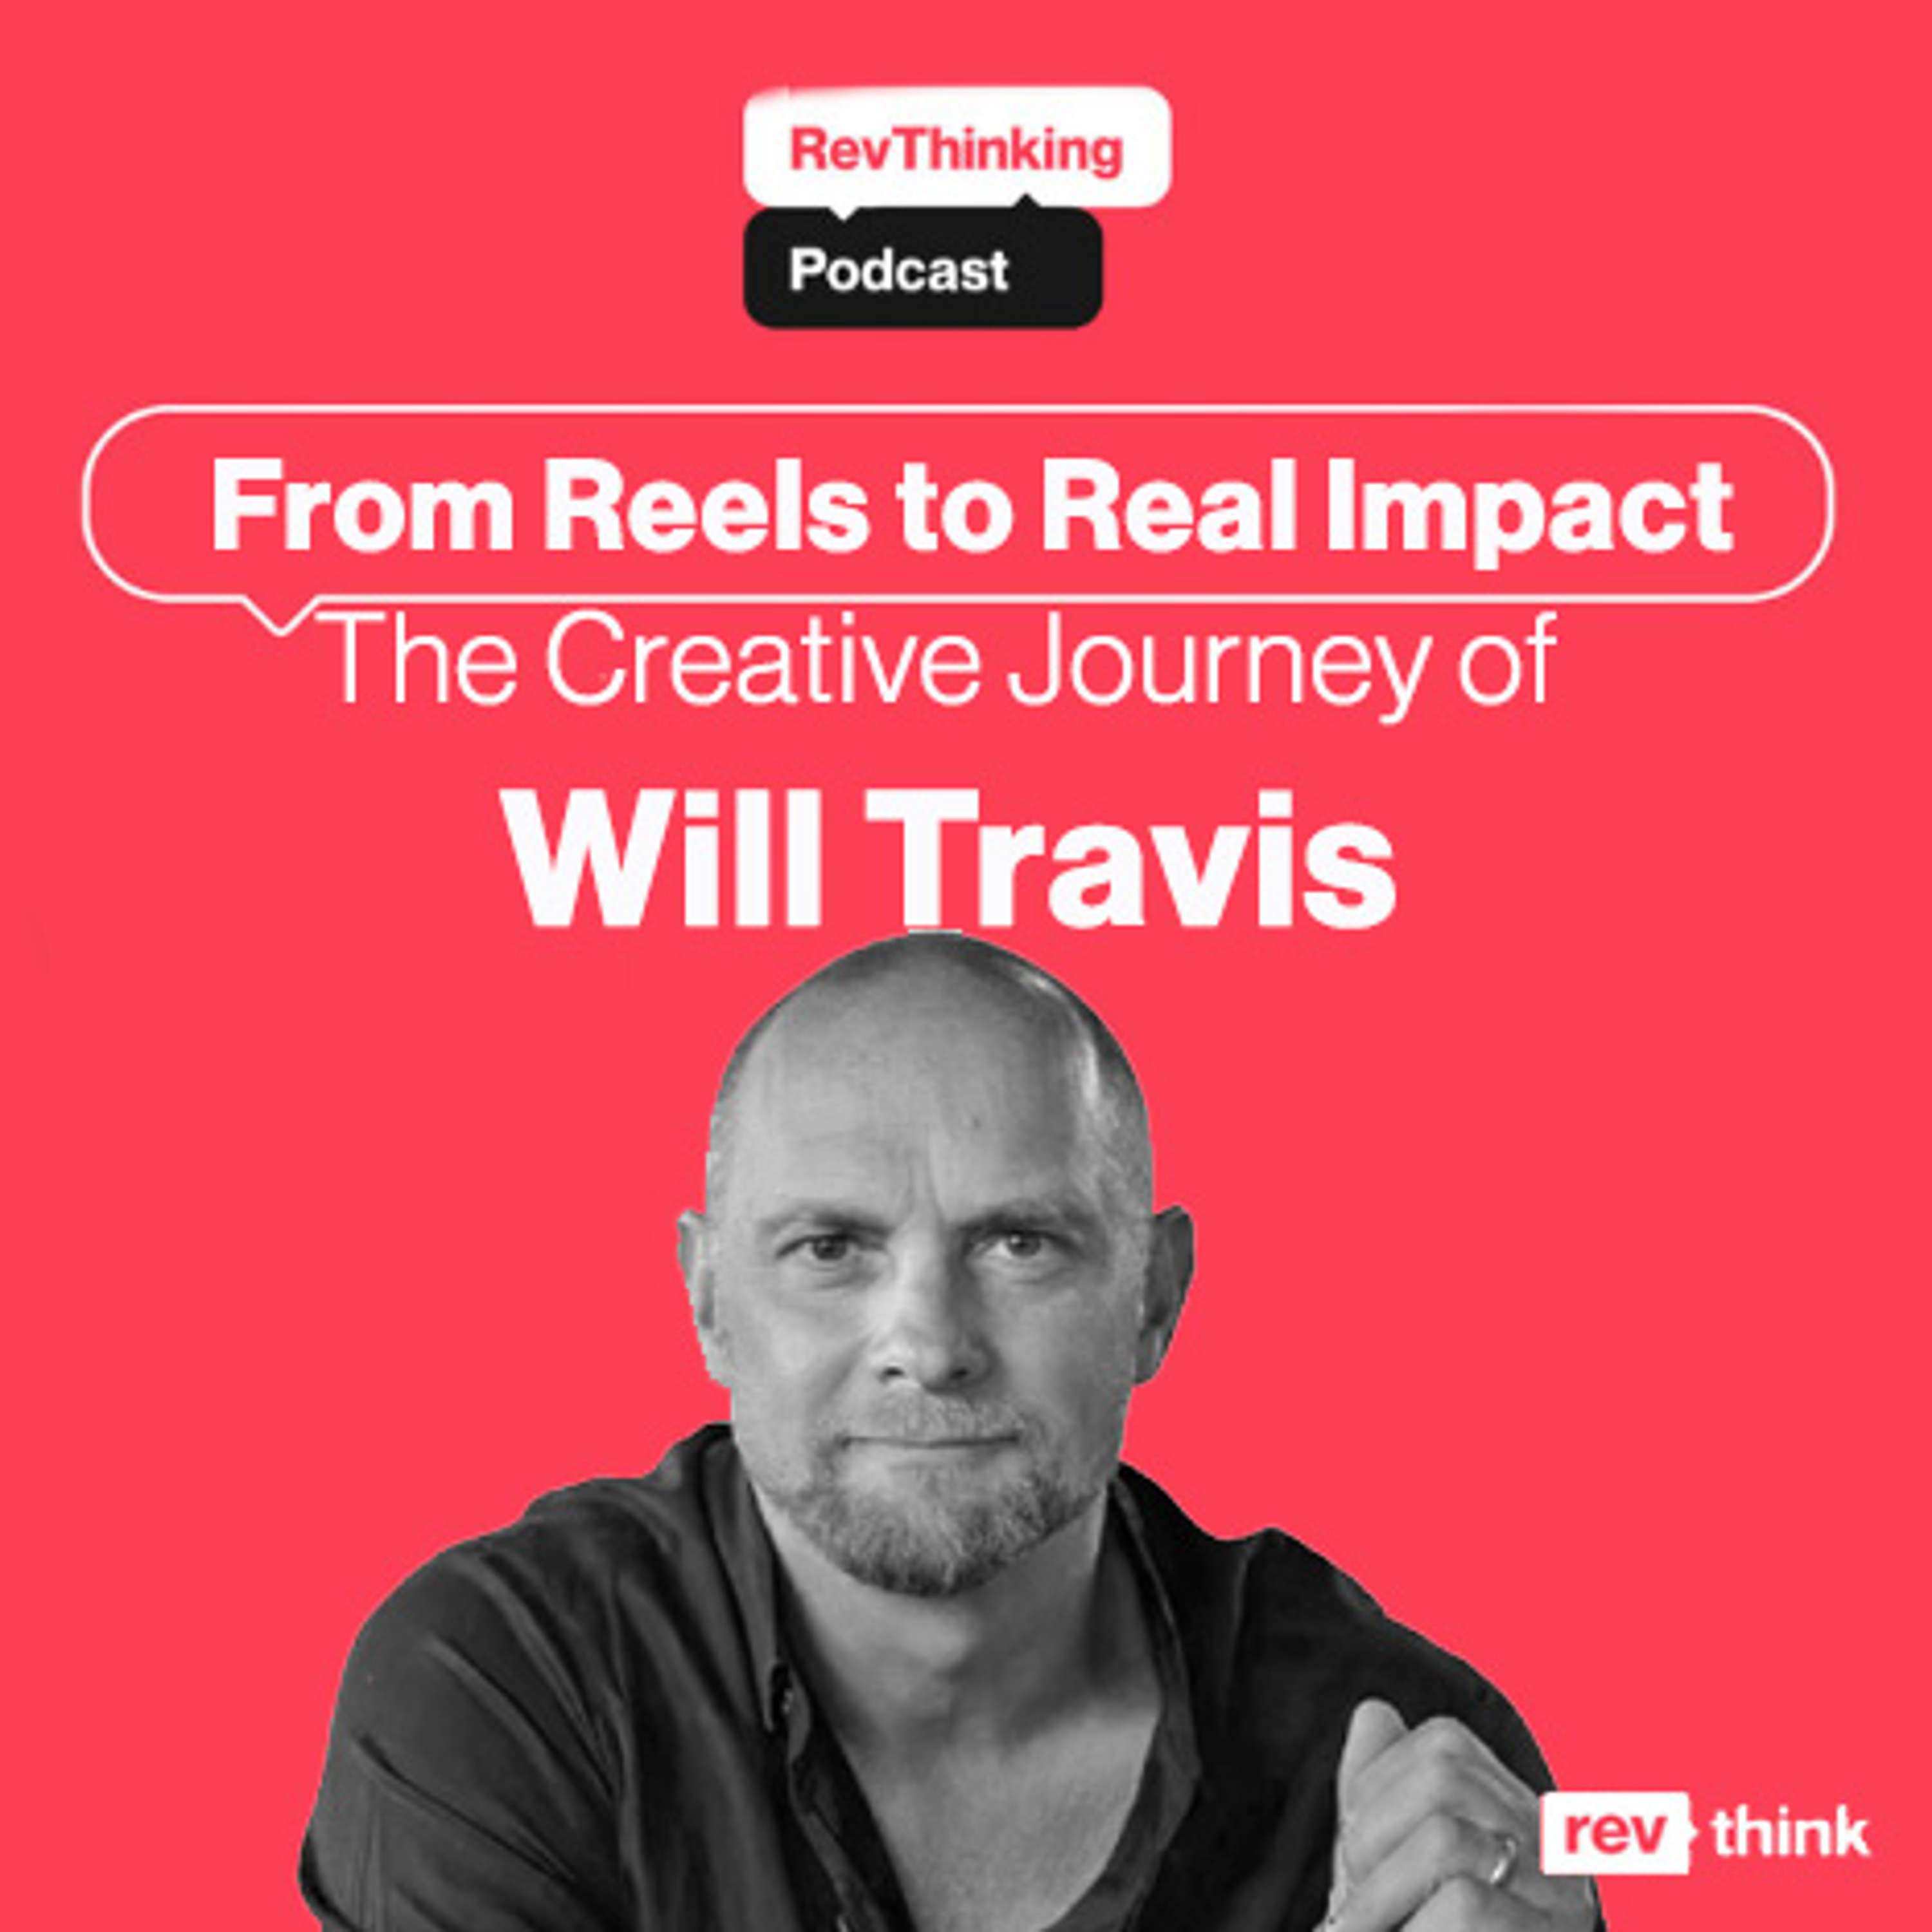 From Reels to Real Impact: The Creative Journey of Will Travis